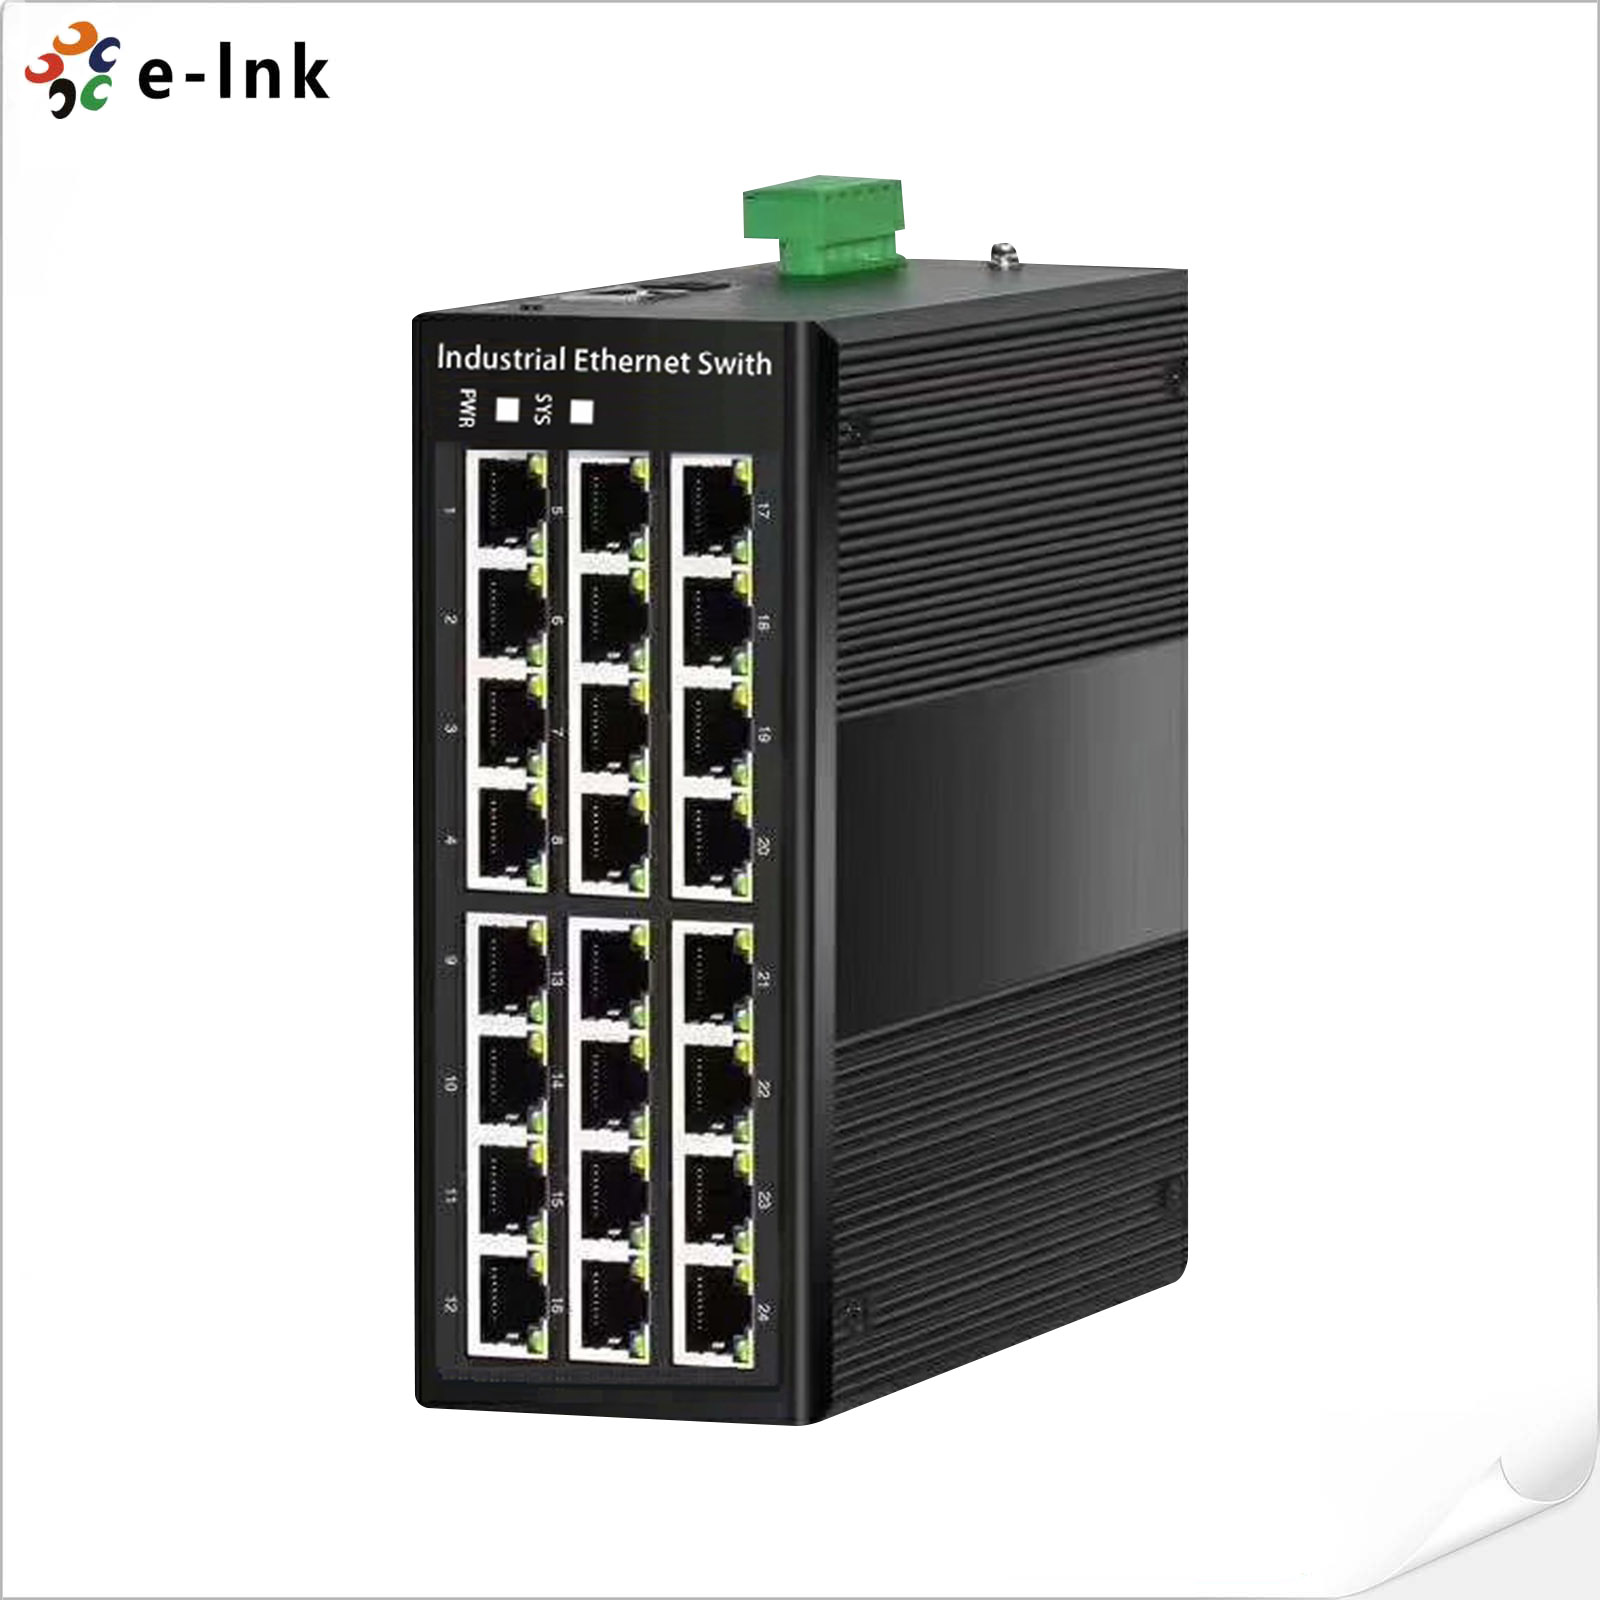 Managed Industrial 16-port 10/100/1000T 802.3at PoE + 8-port 10/100/1000T Ethernet Switch